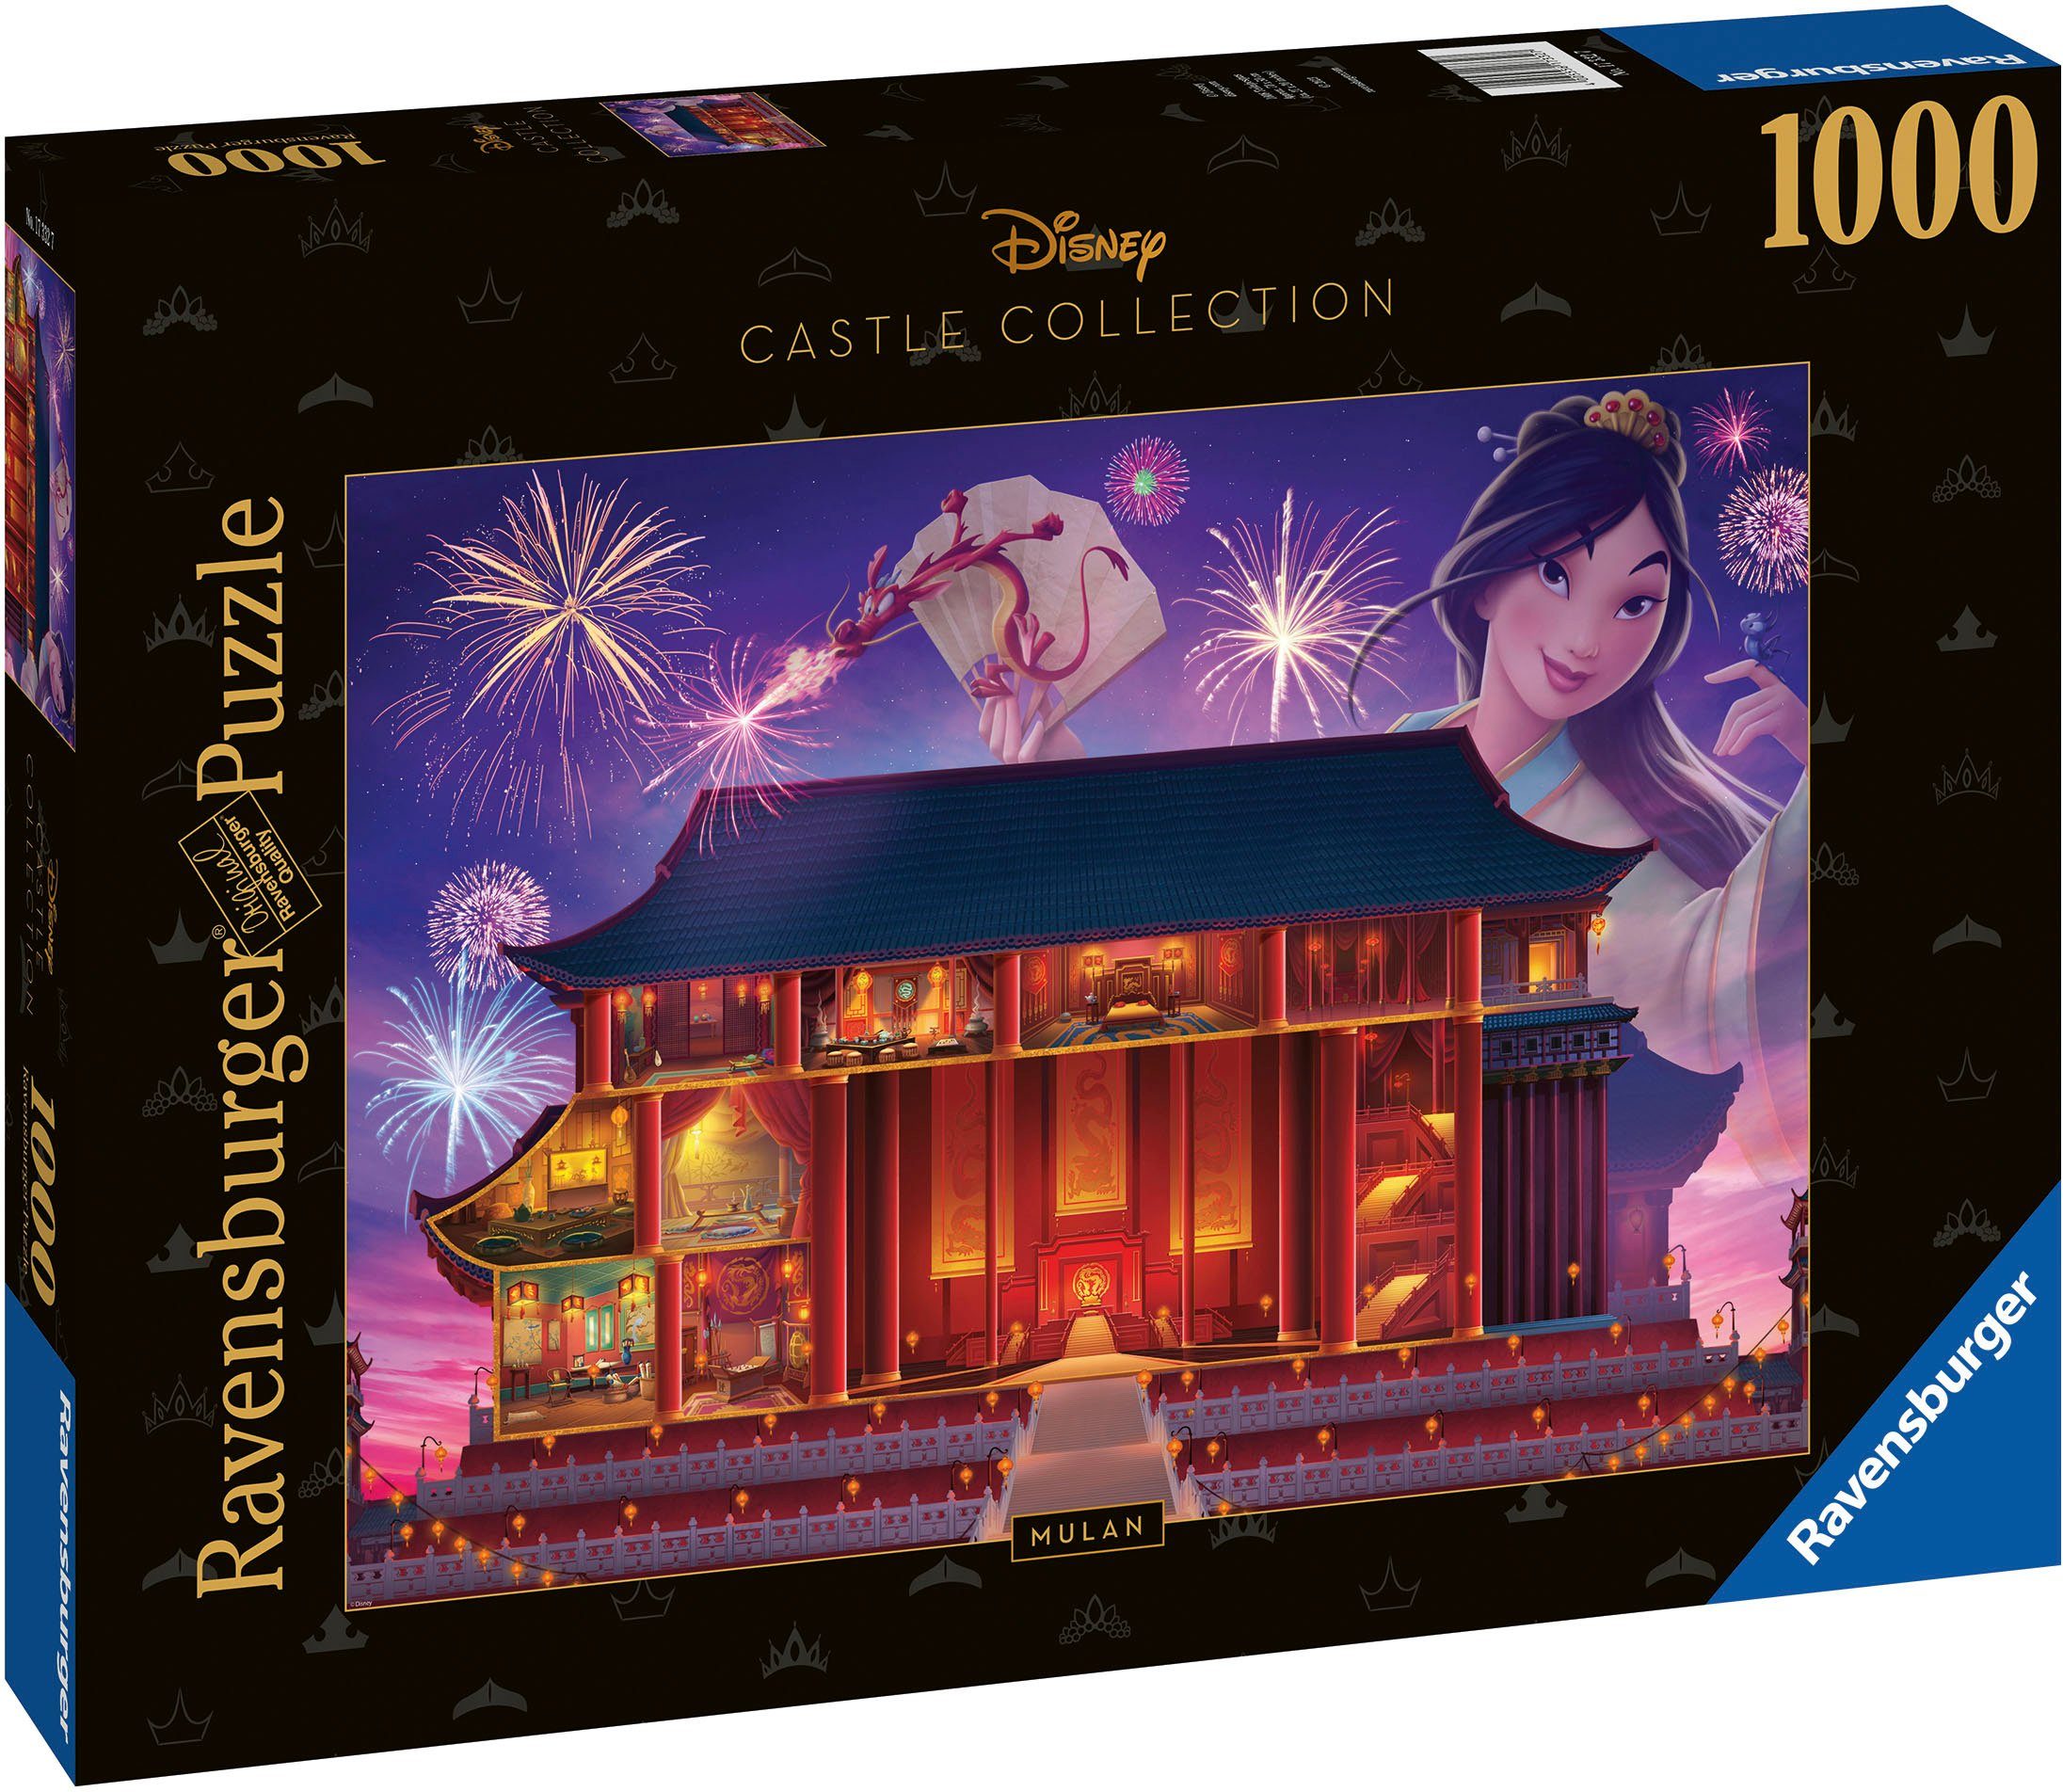 Castle in Mulan, Puzzleteile, 1000 Puzzle Collection, Disney Ravensburger Germany Made